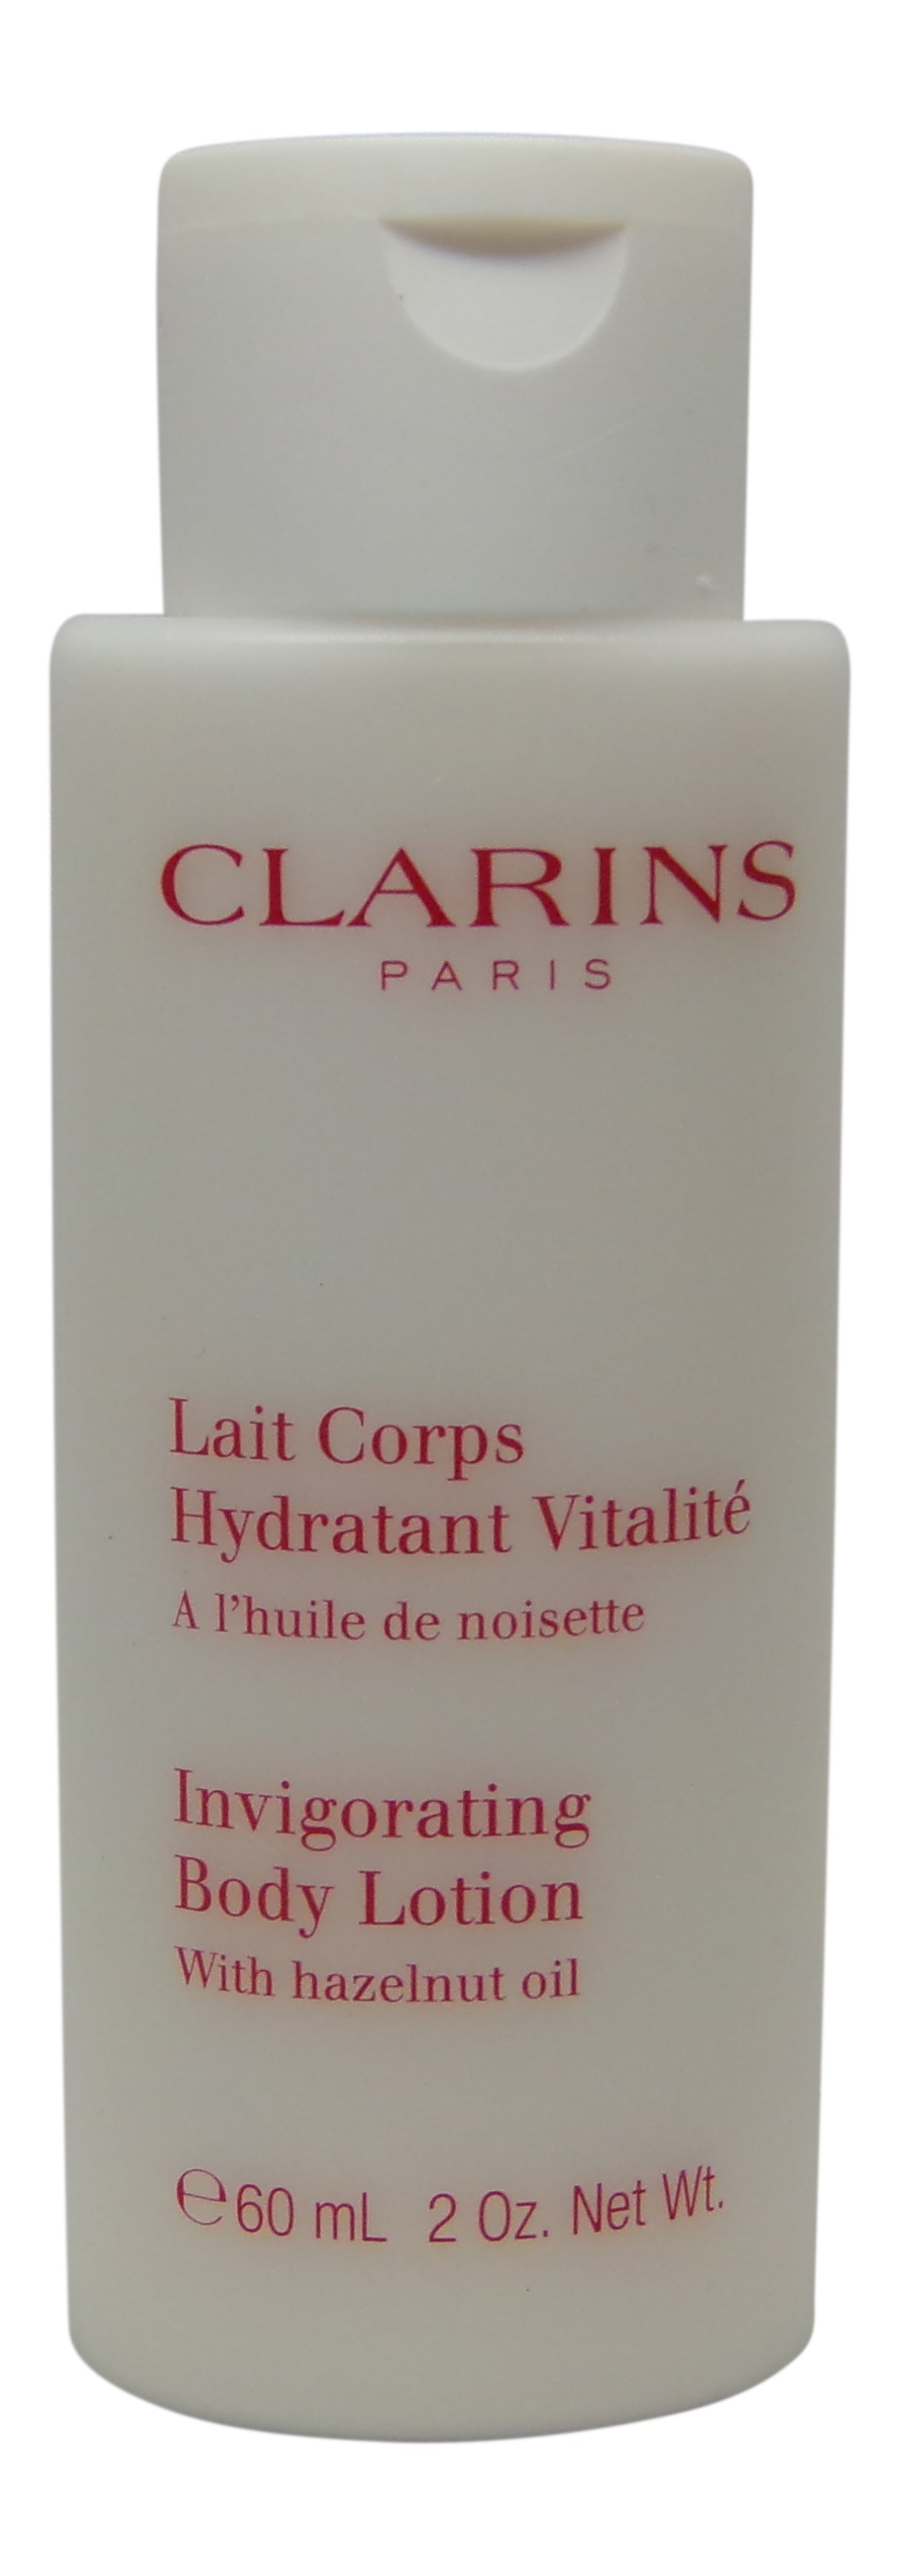 Clarins Invigorating Body Lotion Lot of 2 Bottles each 2oz. Total of 4oz